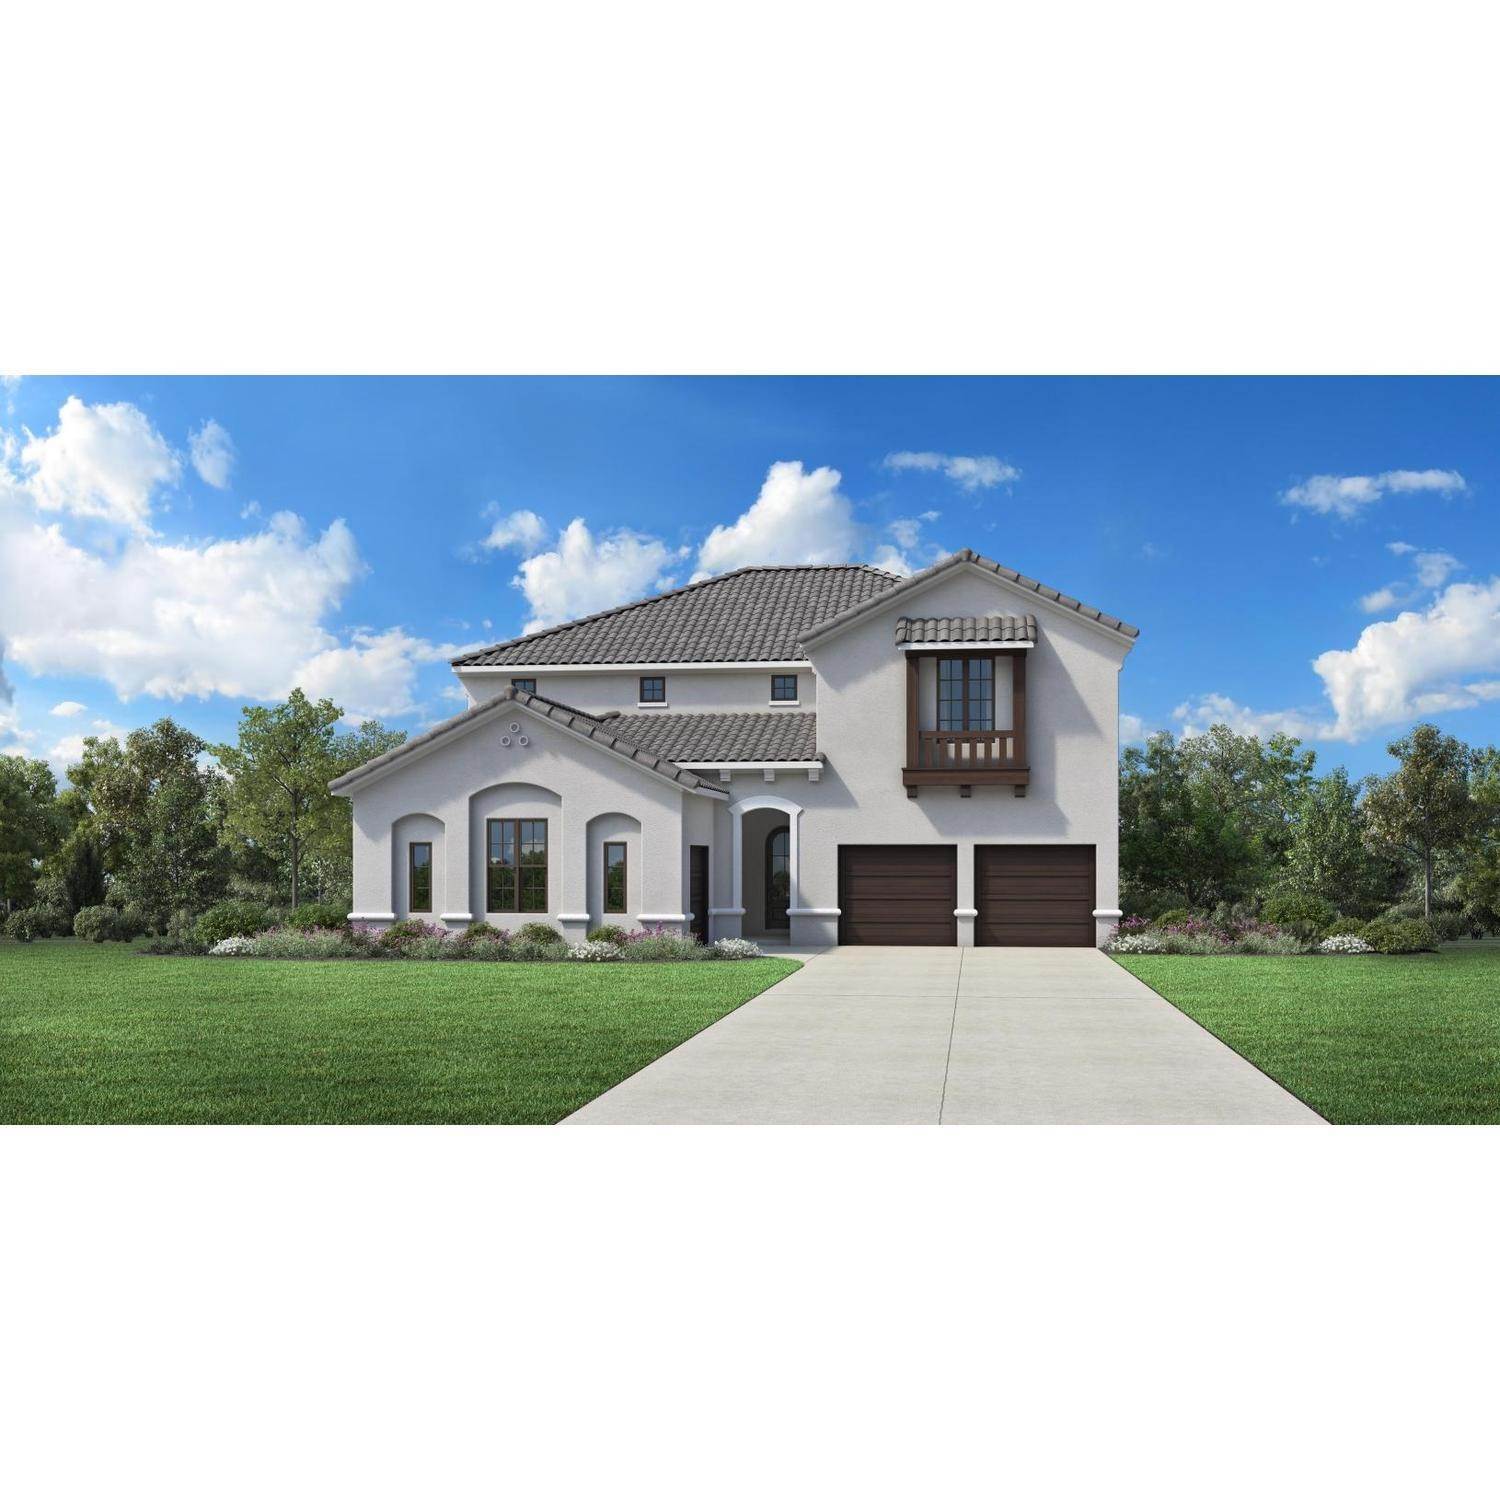 Single Family for Sale at Frisco, TX 75033